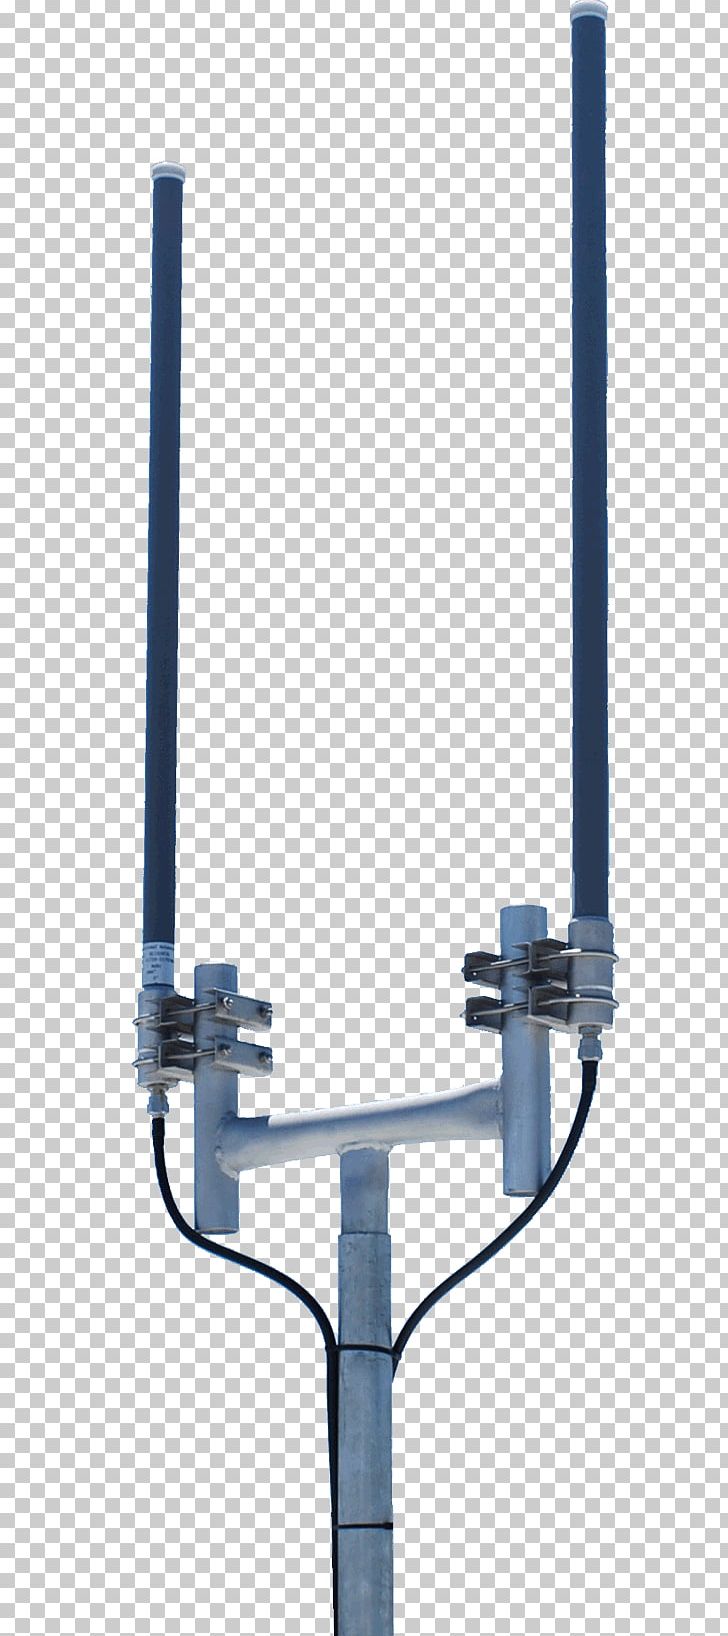 Aerials Antenna Array Omnidirectional Antenna Shopping Telecommunications Tower PNG, Clipart, Aerials, Angle, Antenna, Antenna Array, Array Free PNG Download